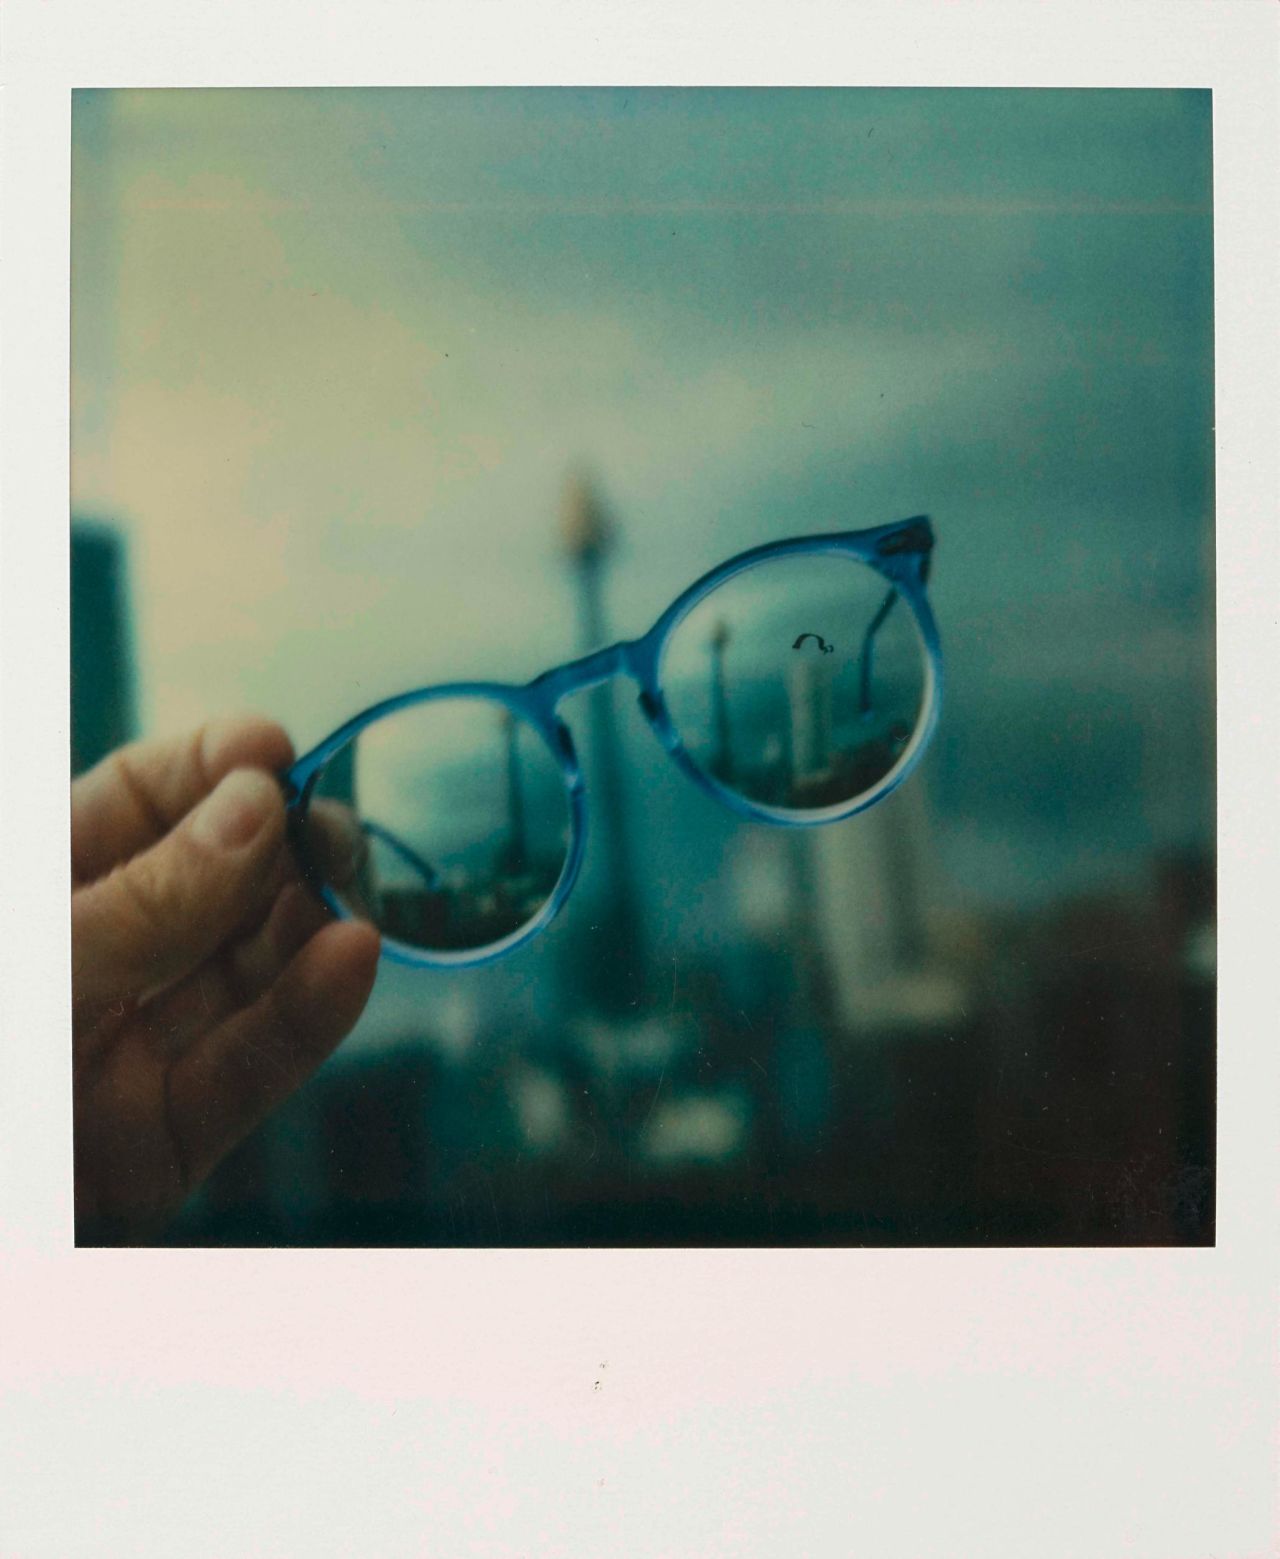 A Polaroid image taken by Wim Wnders in the early 1980s